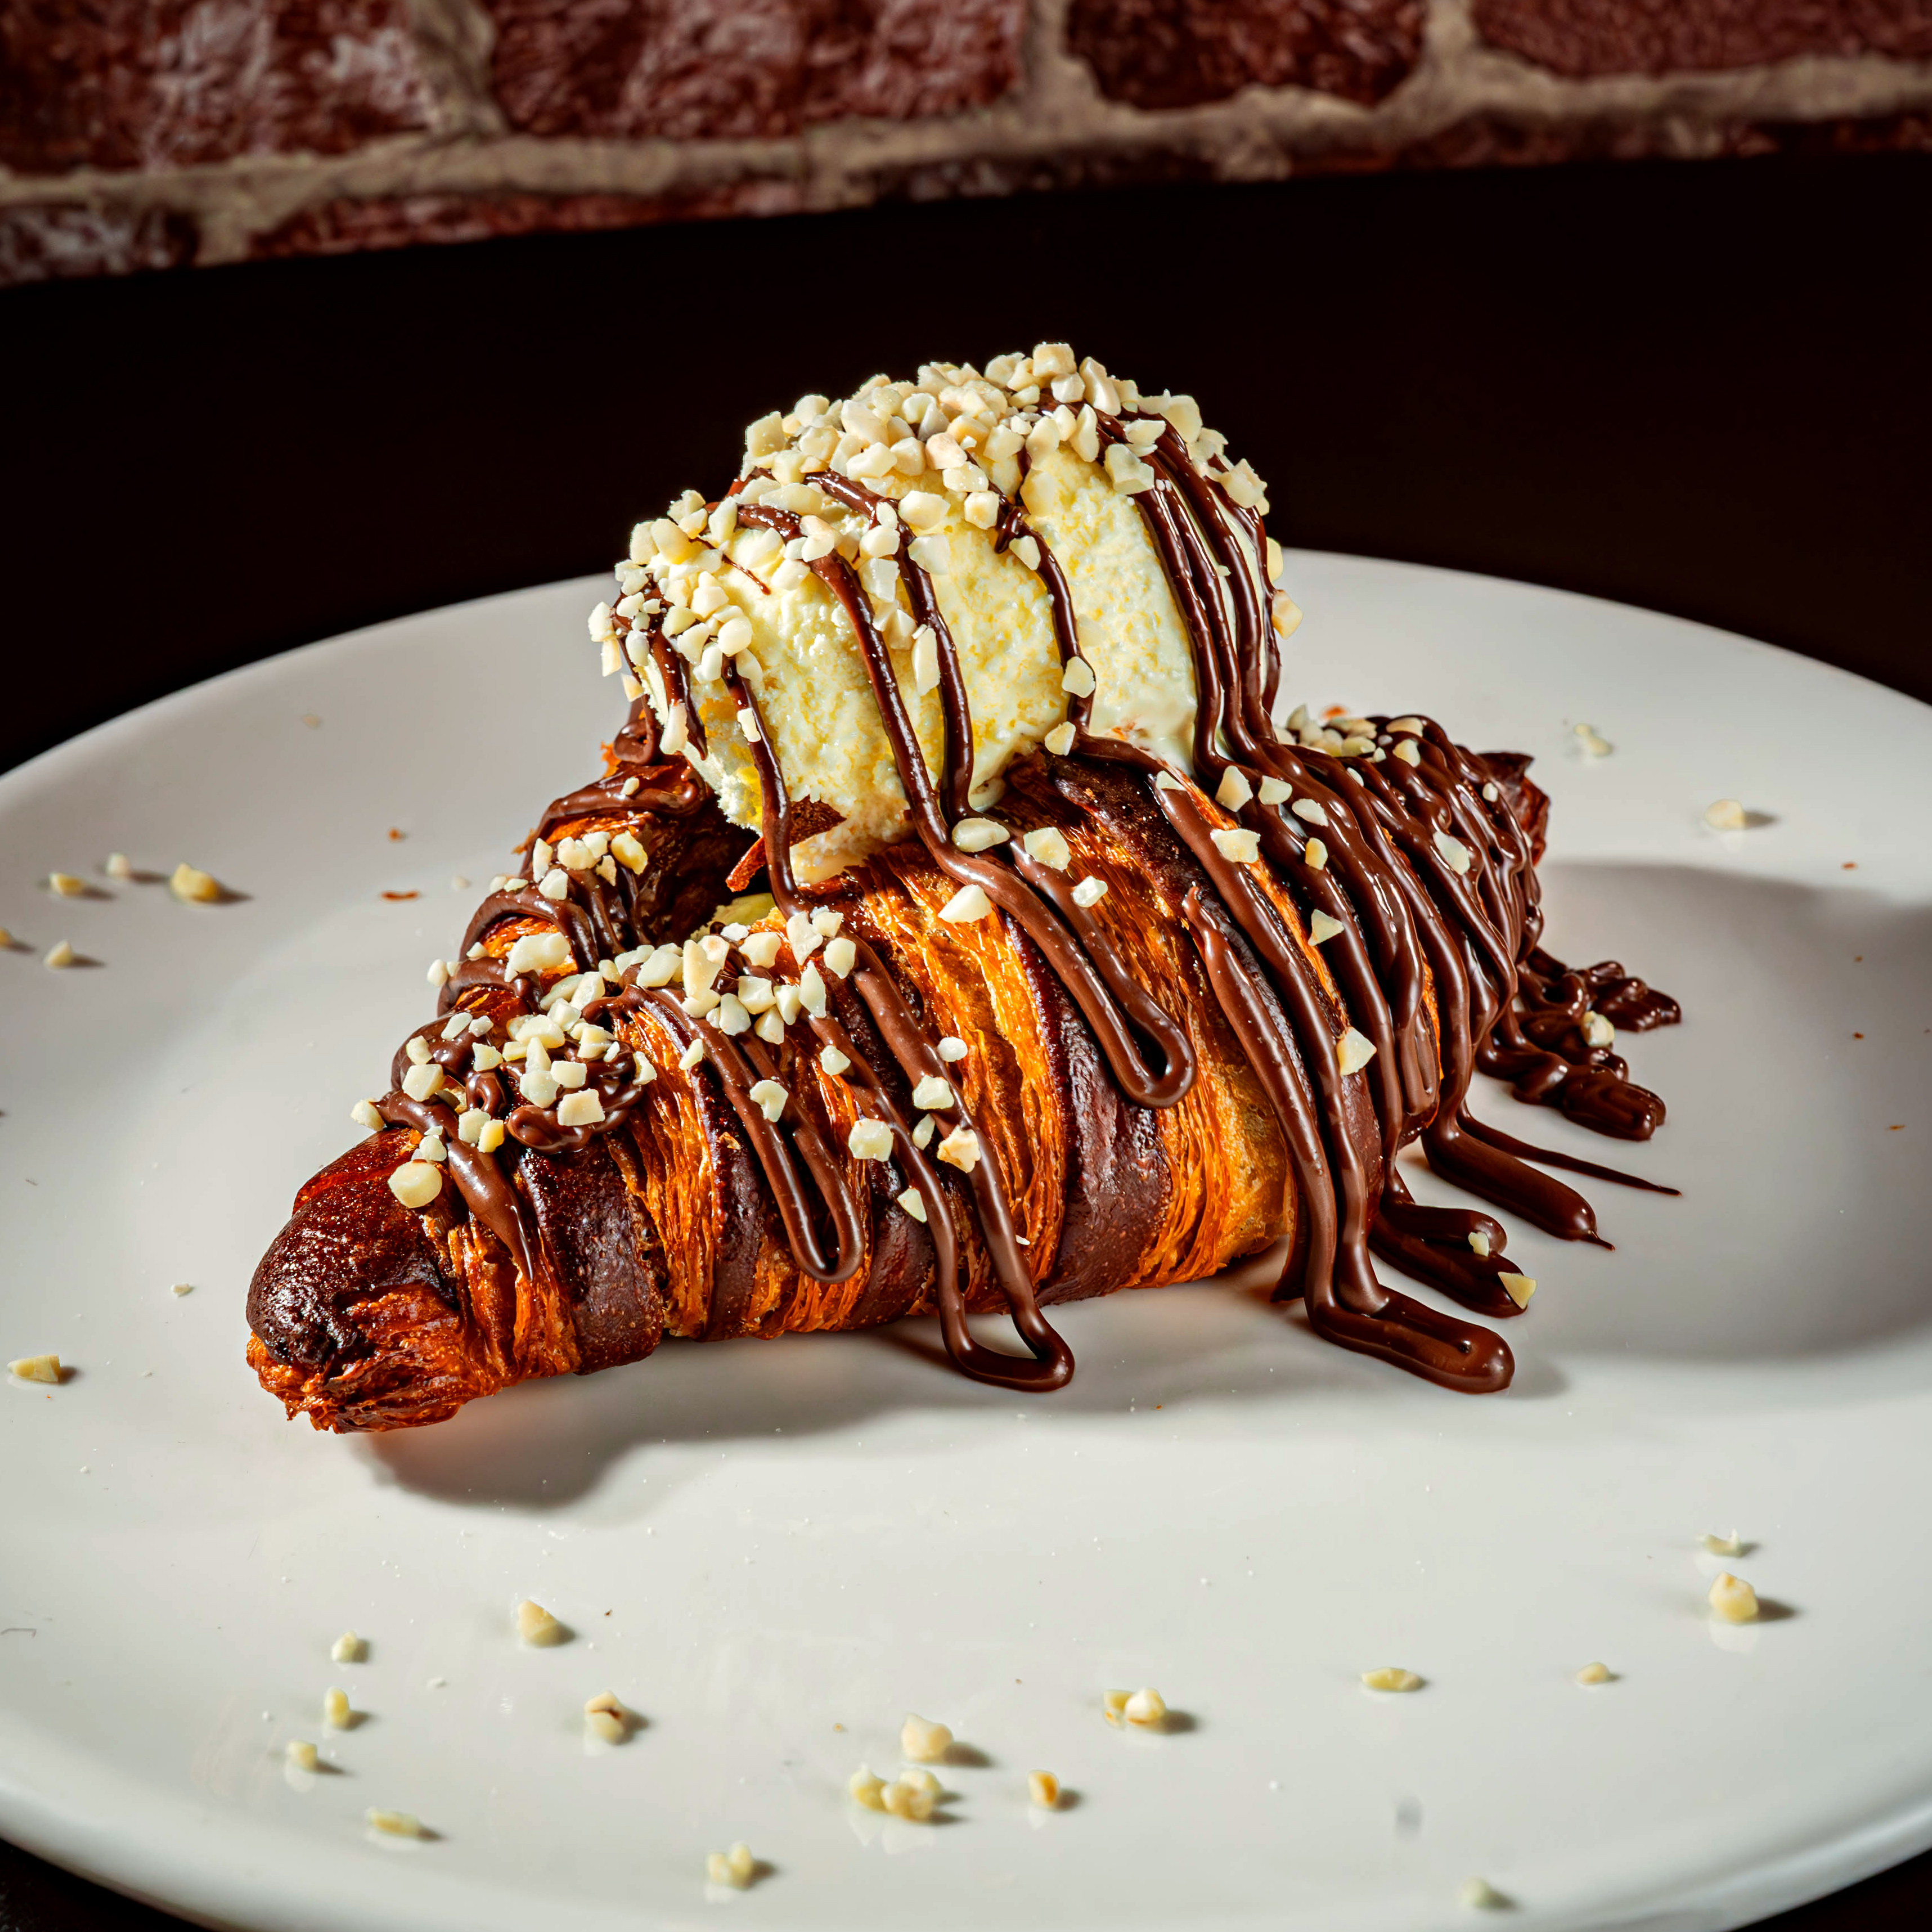 Croissant filled with vanilla ice cream and Nutella